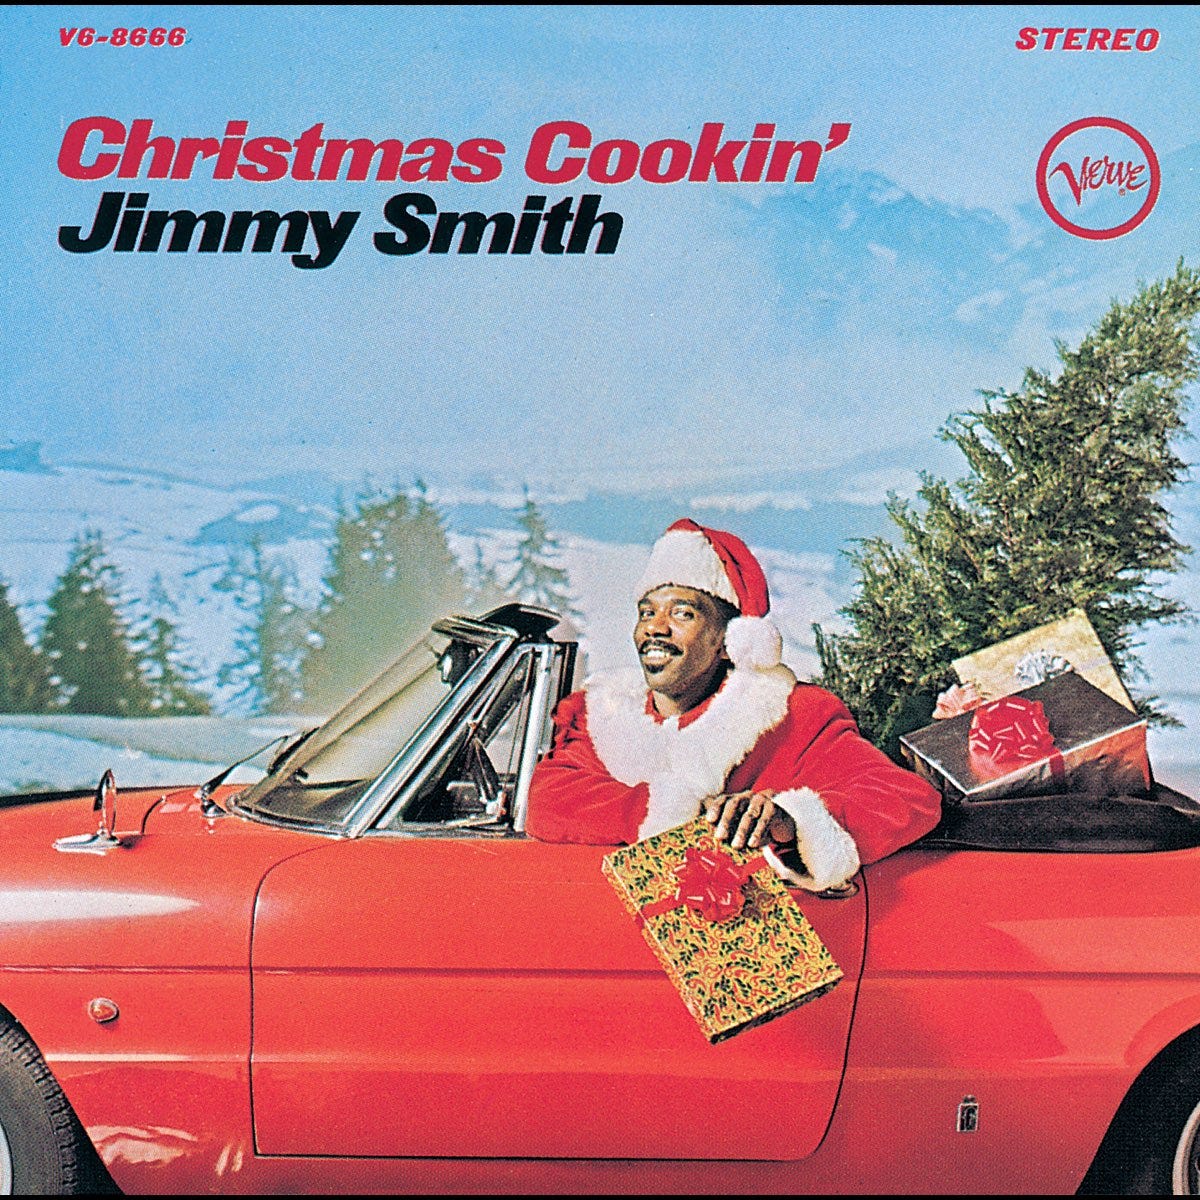 Christmas Cookin' - Album by Jimmy Smith - Apple Music